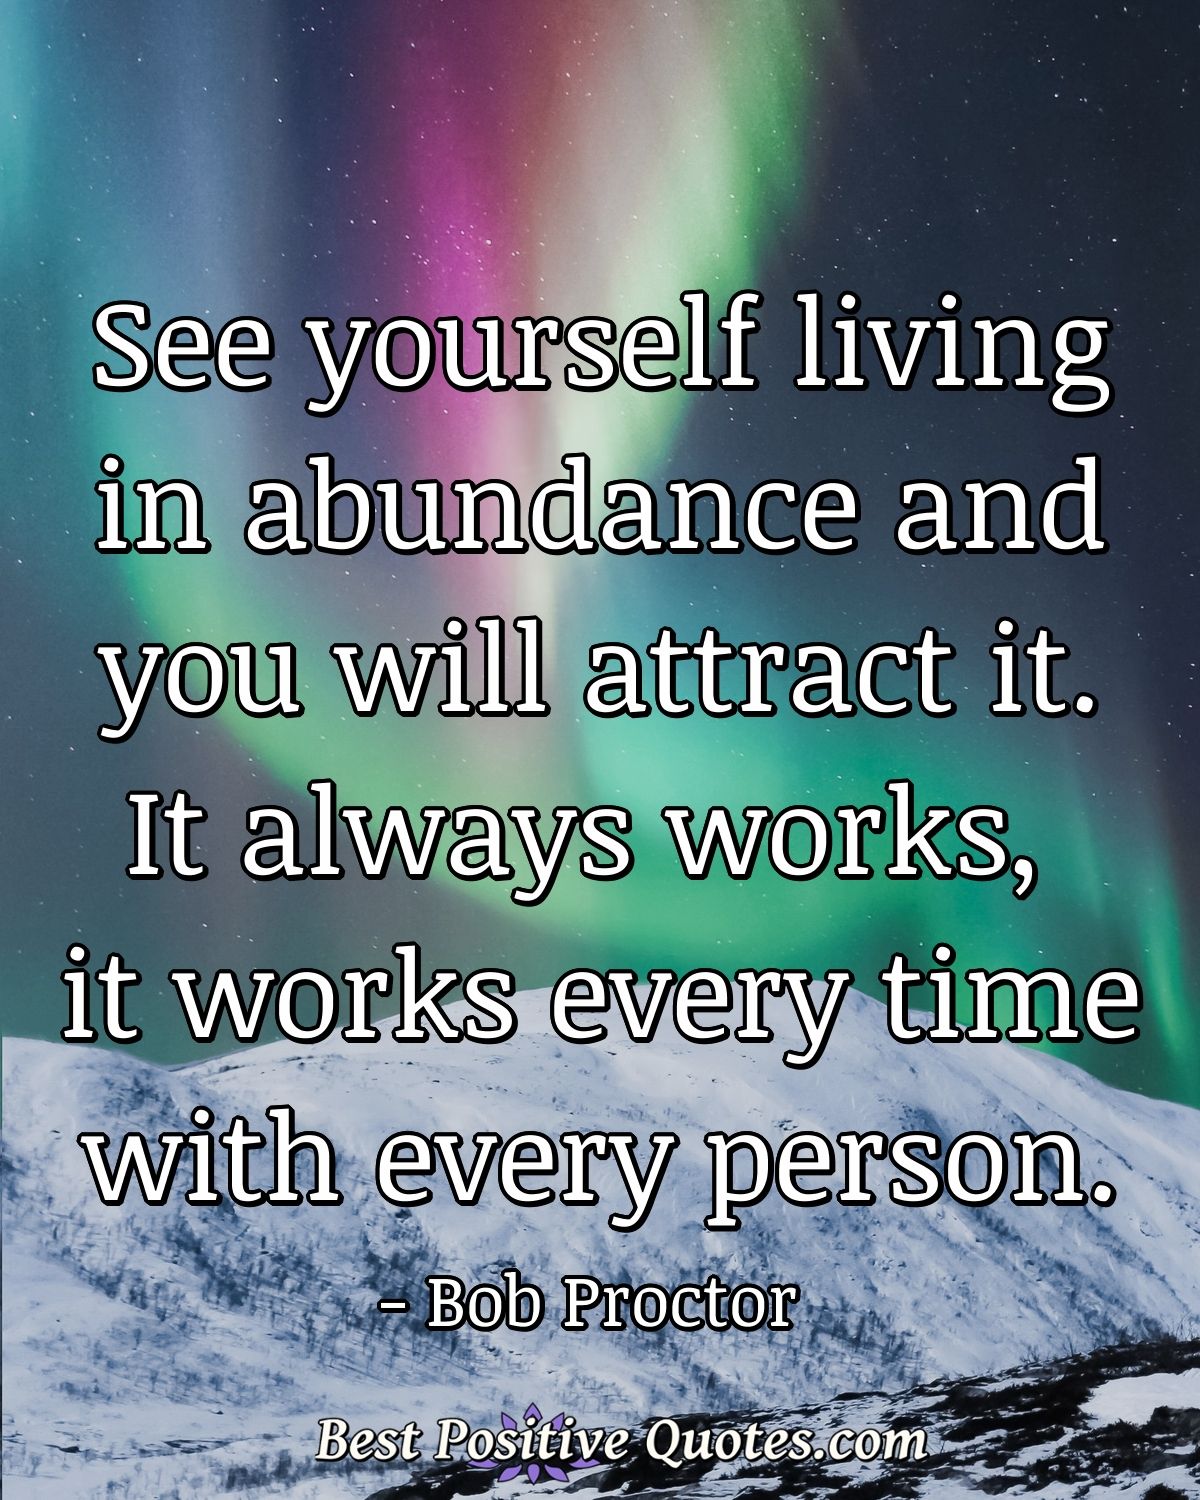 30 Motivational Quotes About Life From Bob Proctor